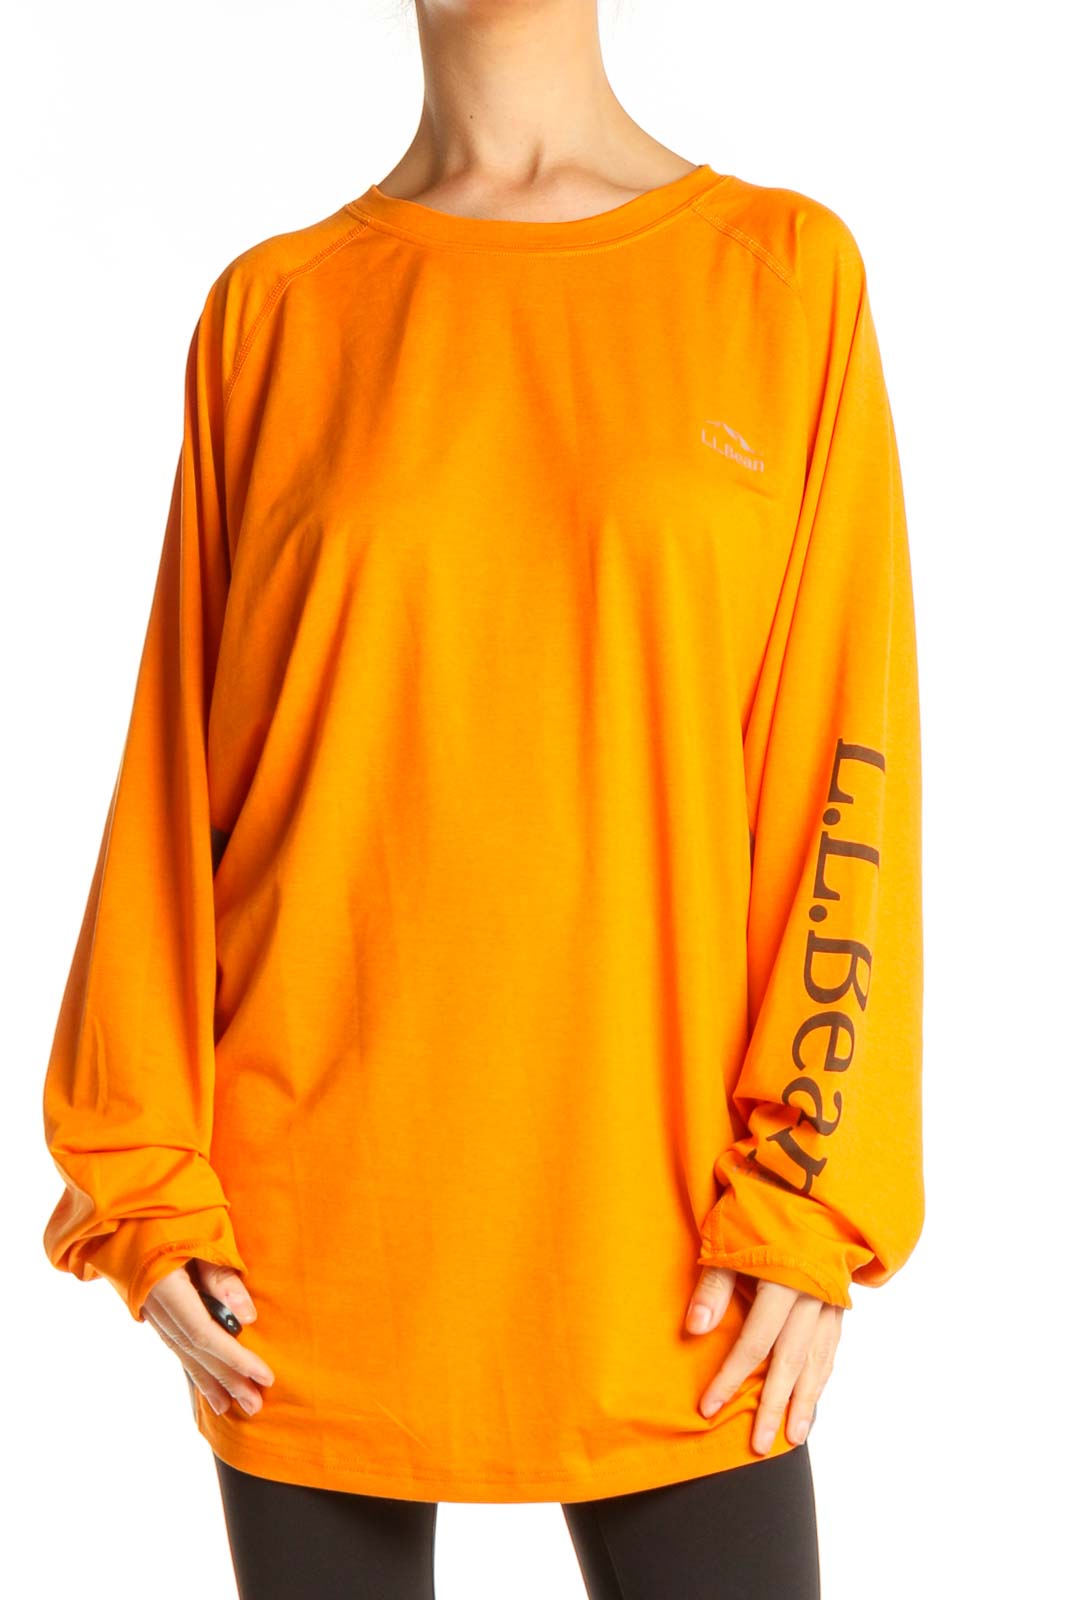 Orange All Day Wear Top Front